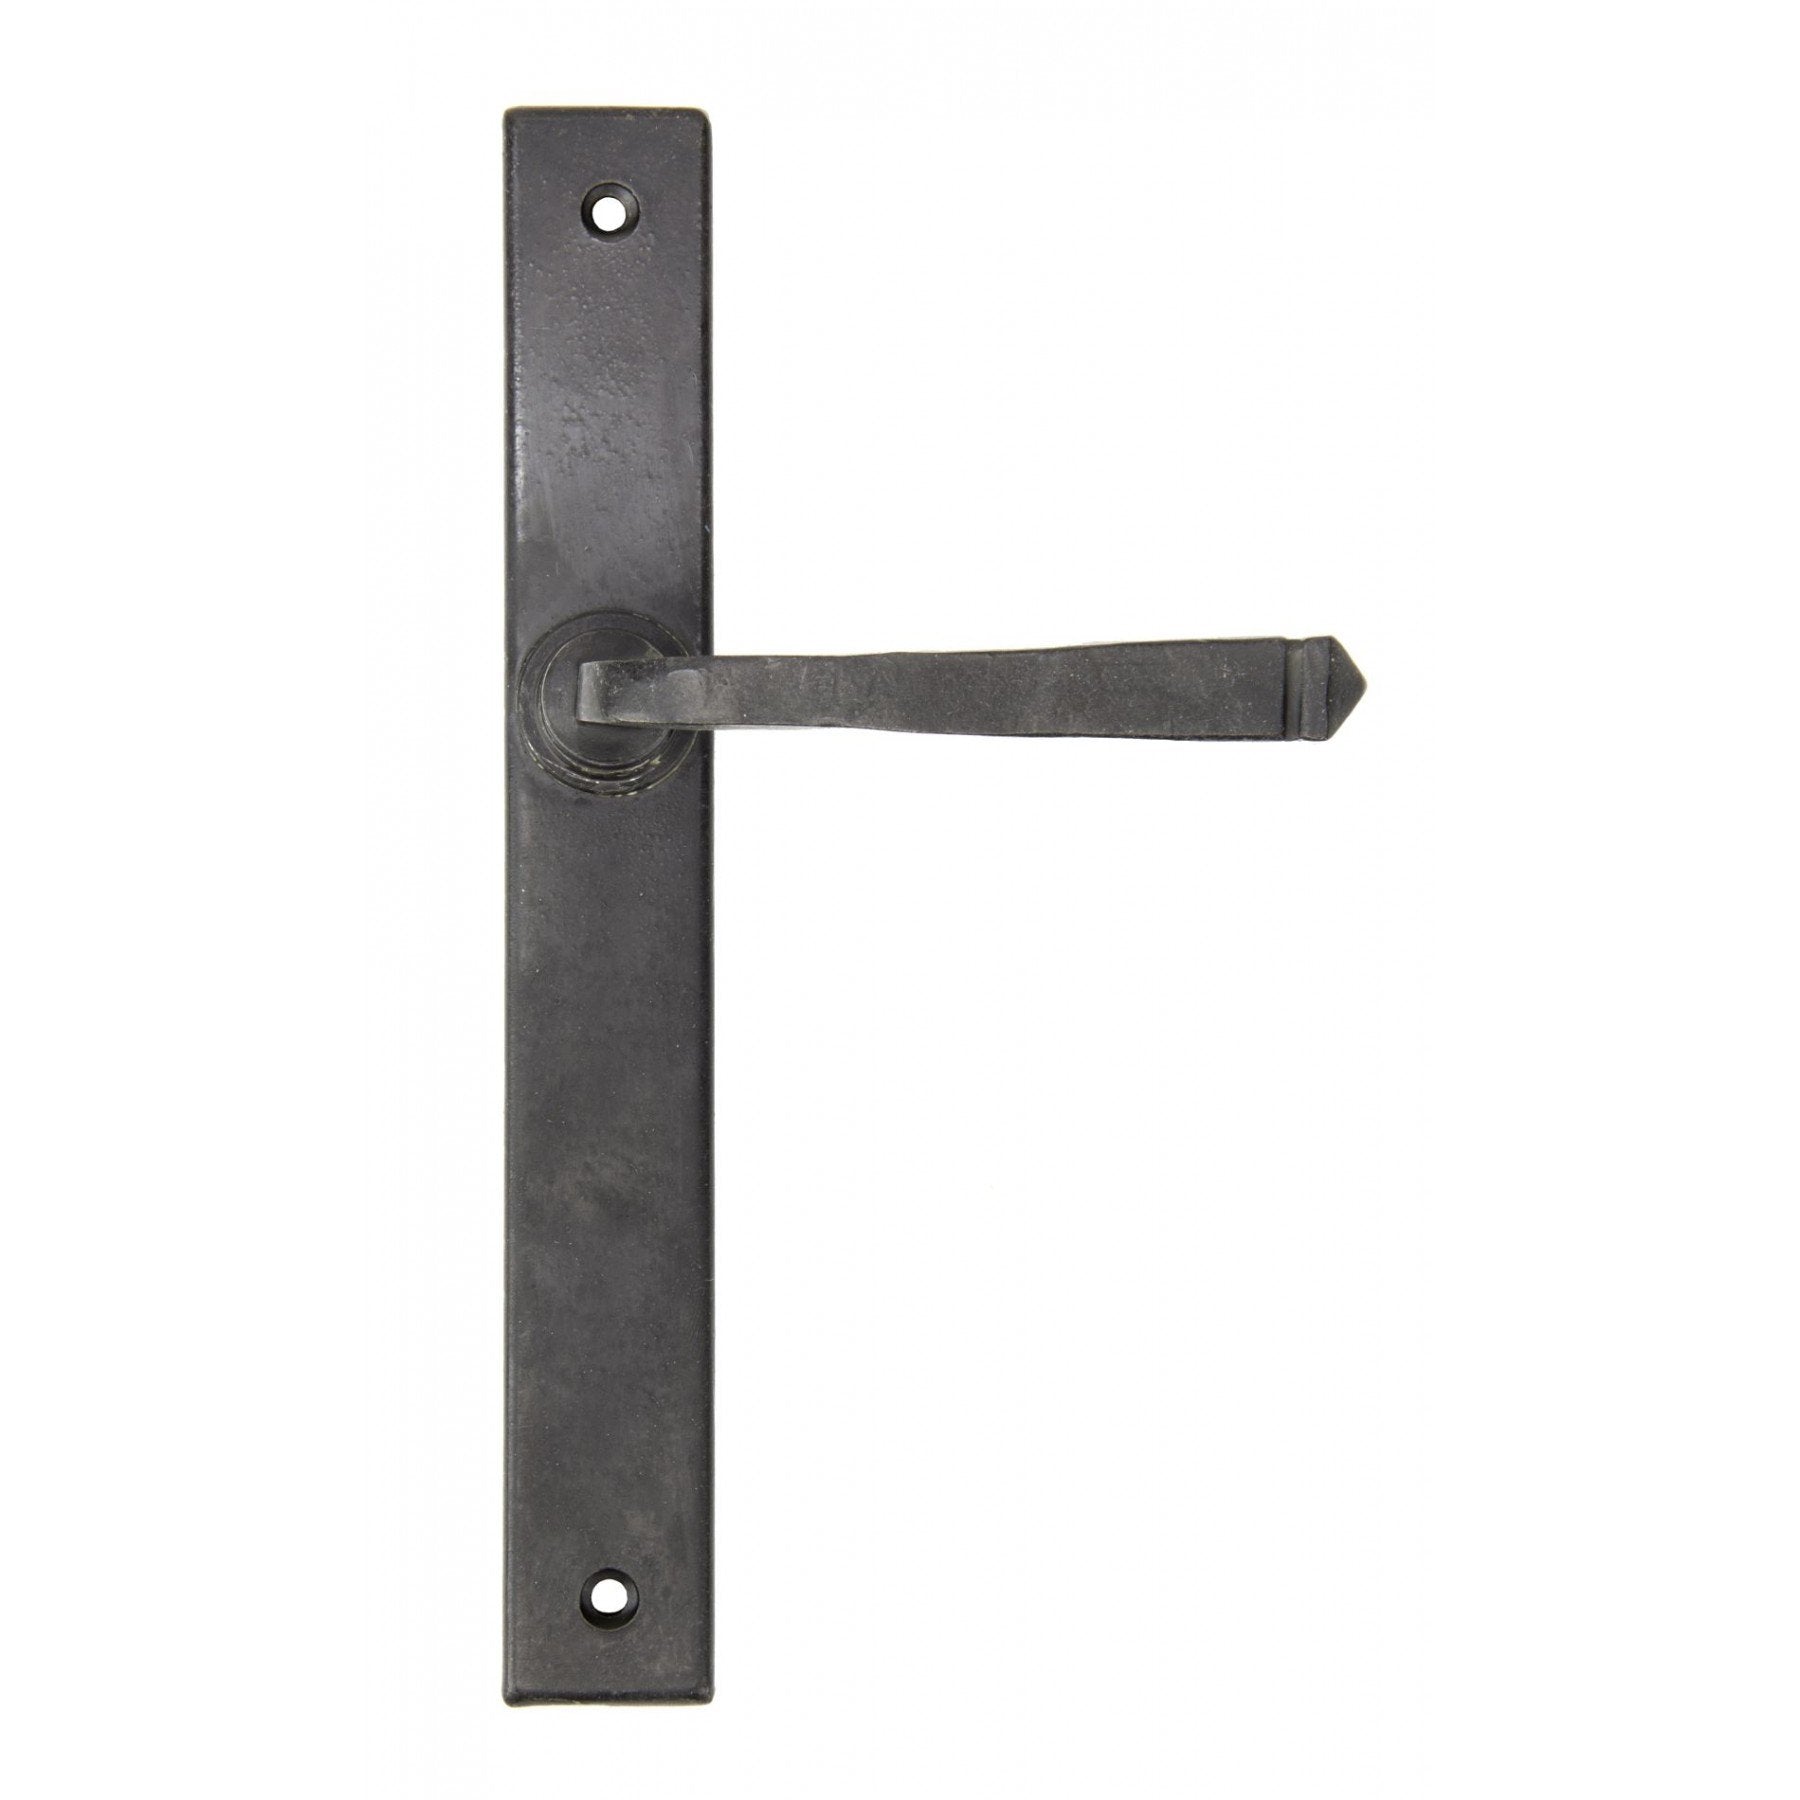 From the Anvil External Beeswax Avon Slimline Lever Latch Set